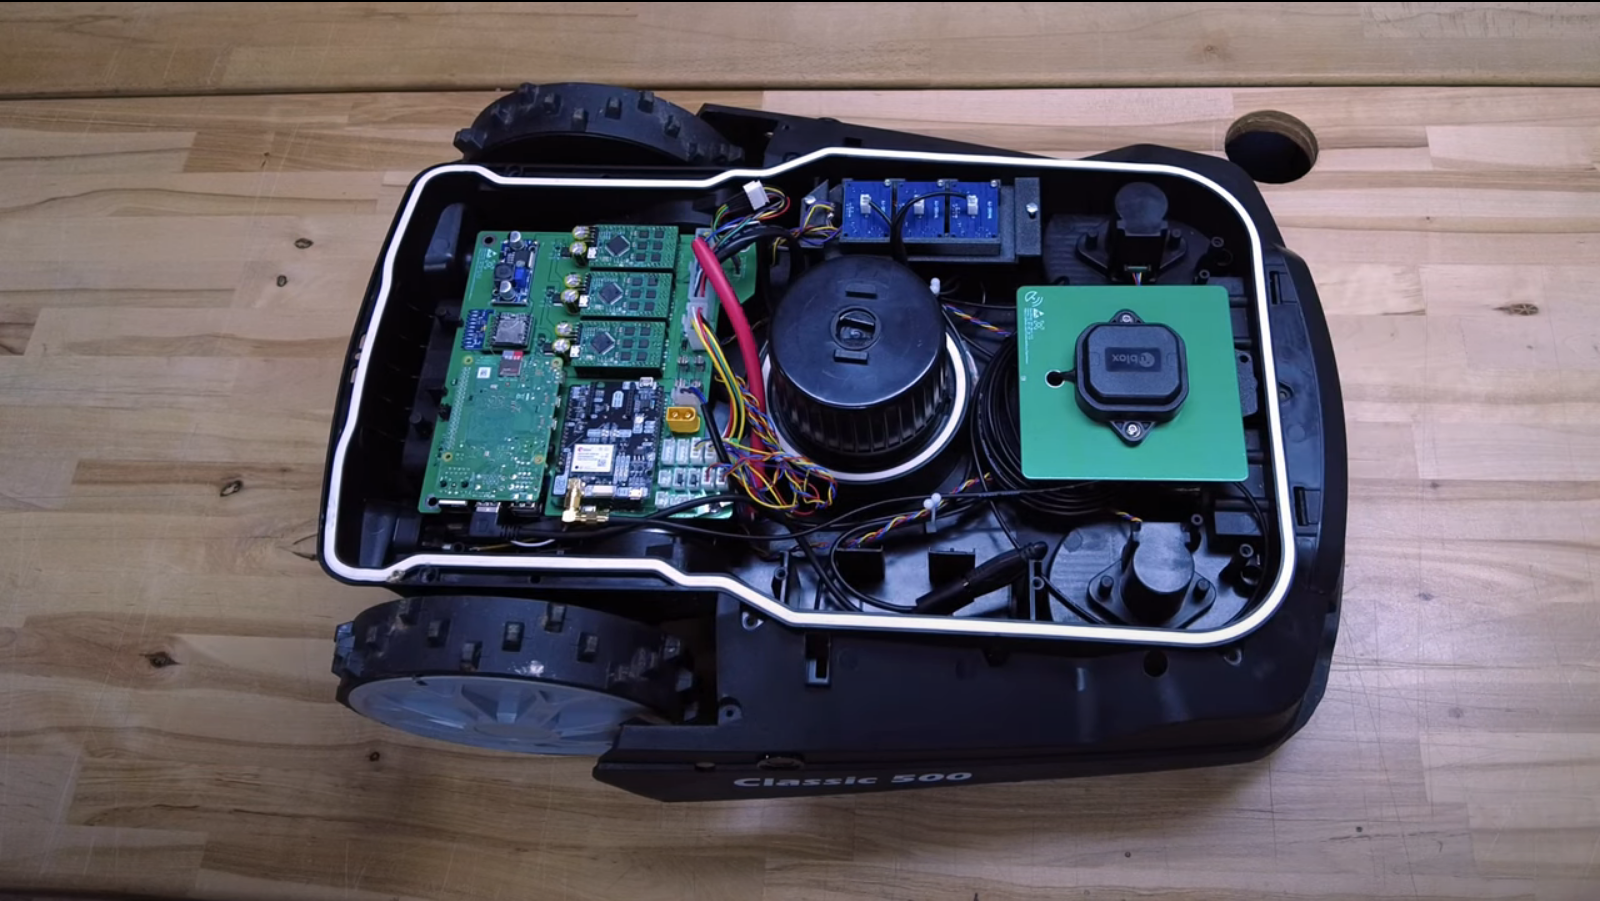 Oprigtighed Elevator Vælge OpenMower: Open Source Robotic Lawn Mower With RTK GPS | Hackaday